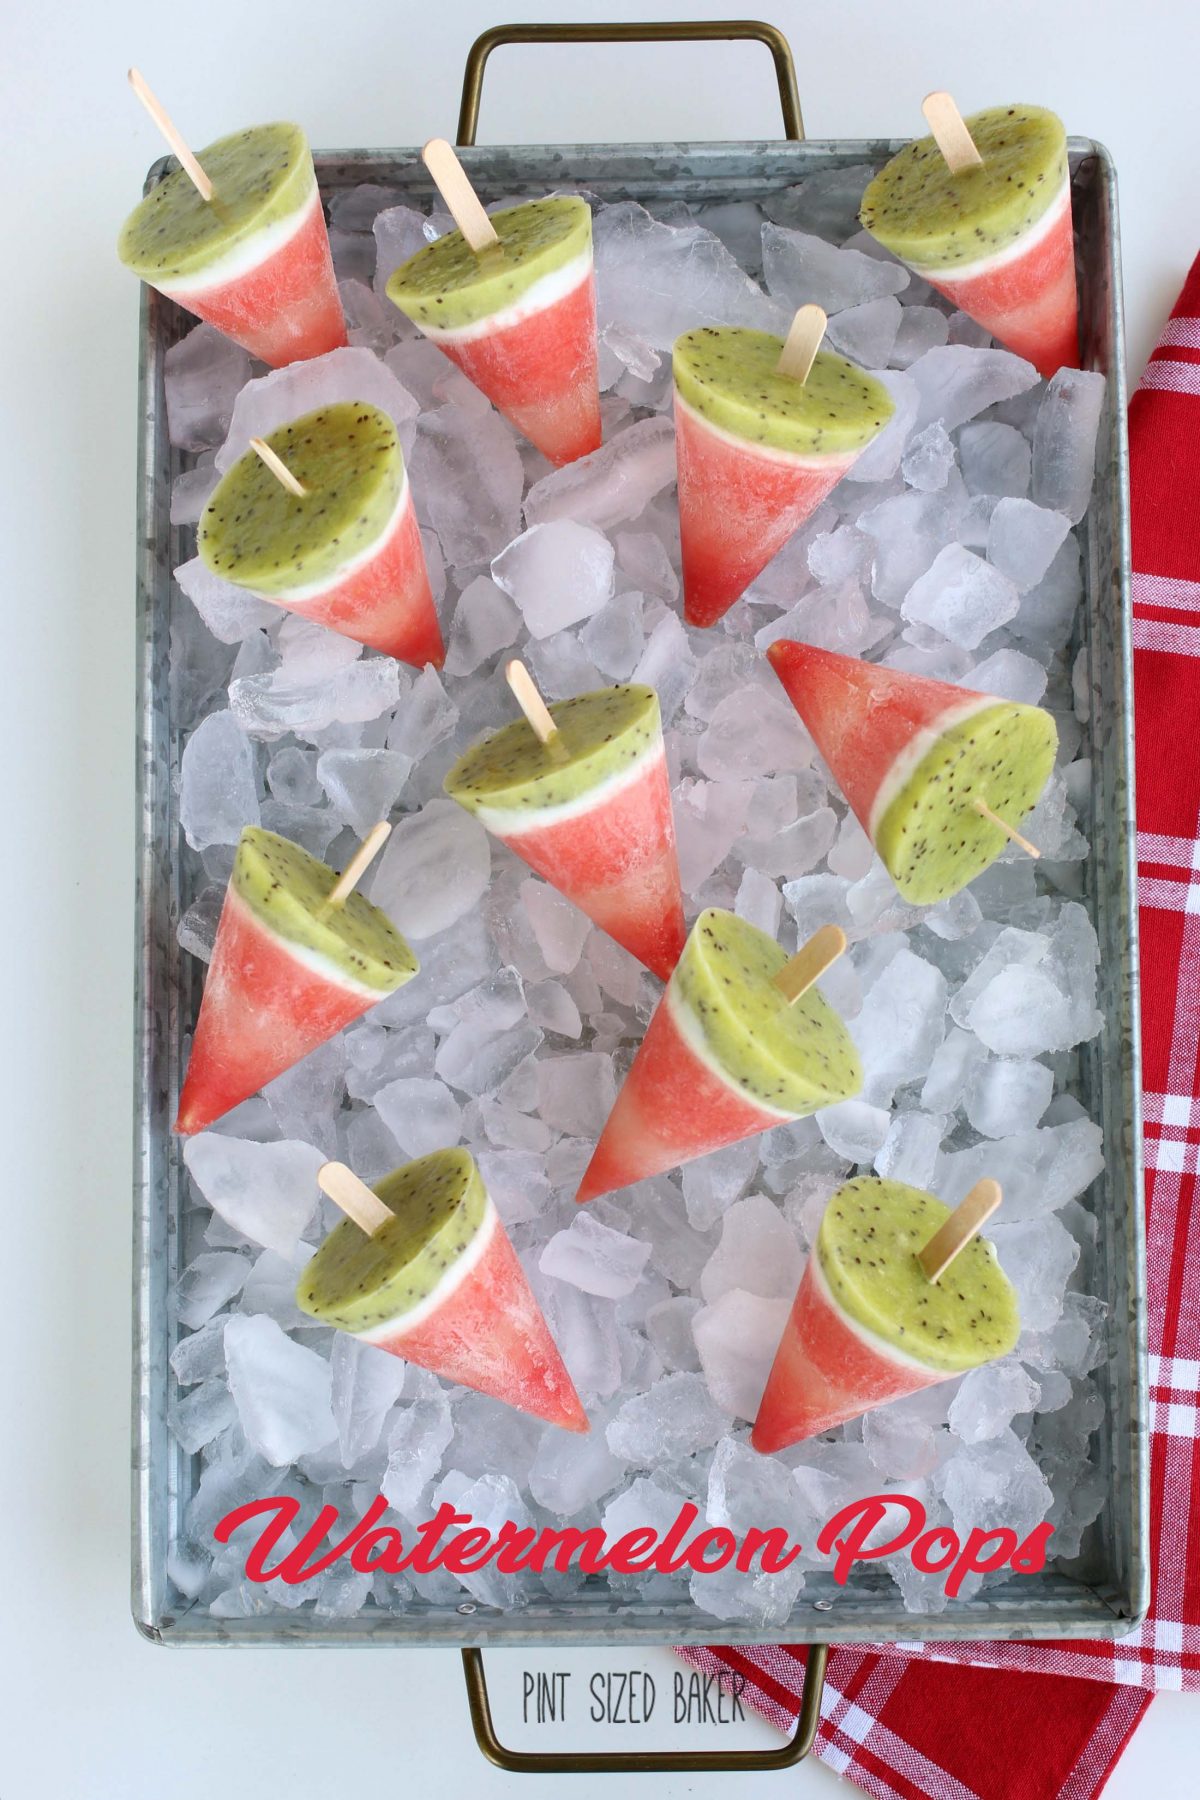 Overhead view of frozen watermelon pops shown on a tray of ice.